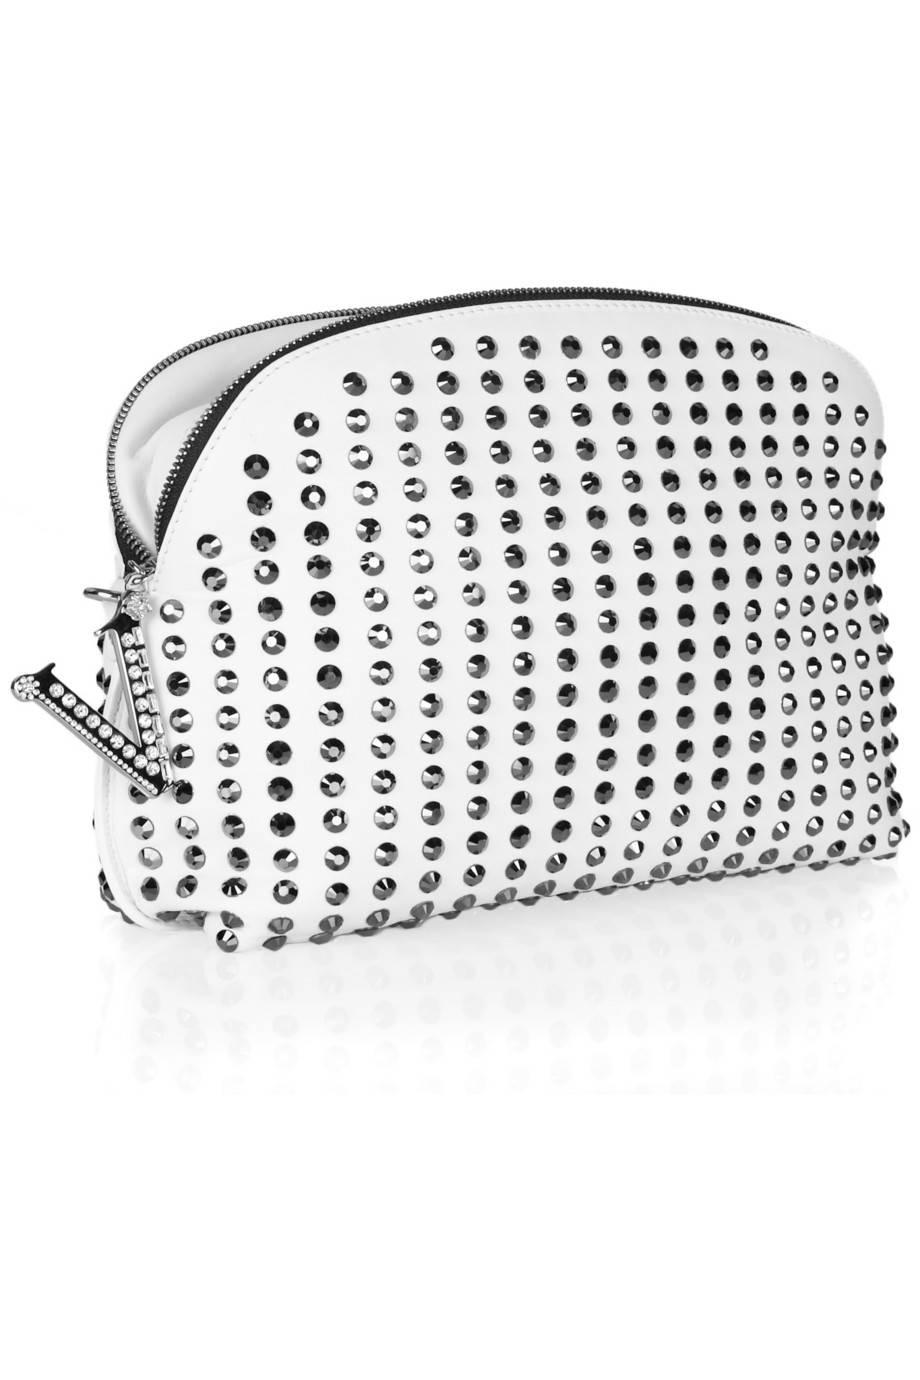 This Versace white nappa leather clutch is embellished with dark-gray diamantes. 

White nappa leather (Lamb)

Dark-gray diamante studs, clear diamante-studded designer charm, chain strap at bottom, silver hardware
Internal pouch pocket
Fully